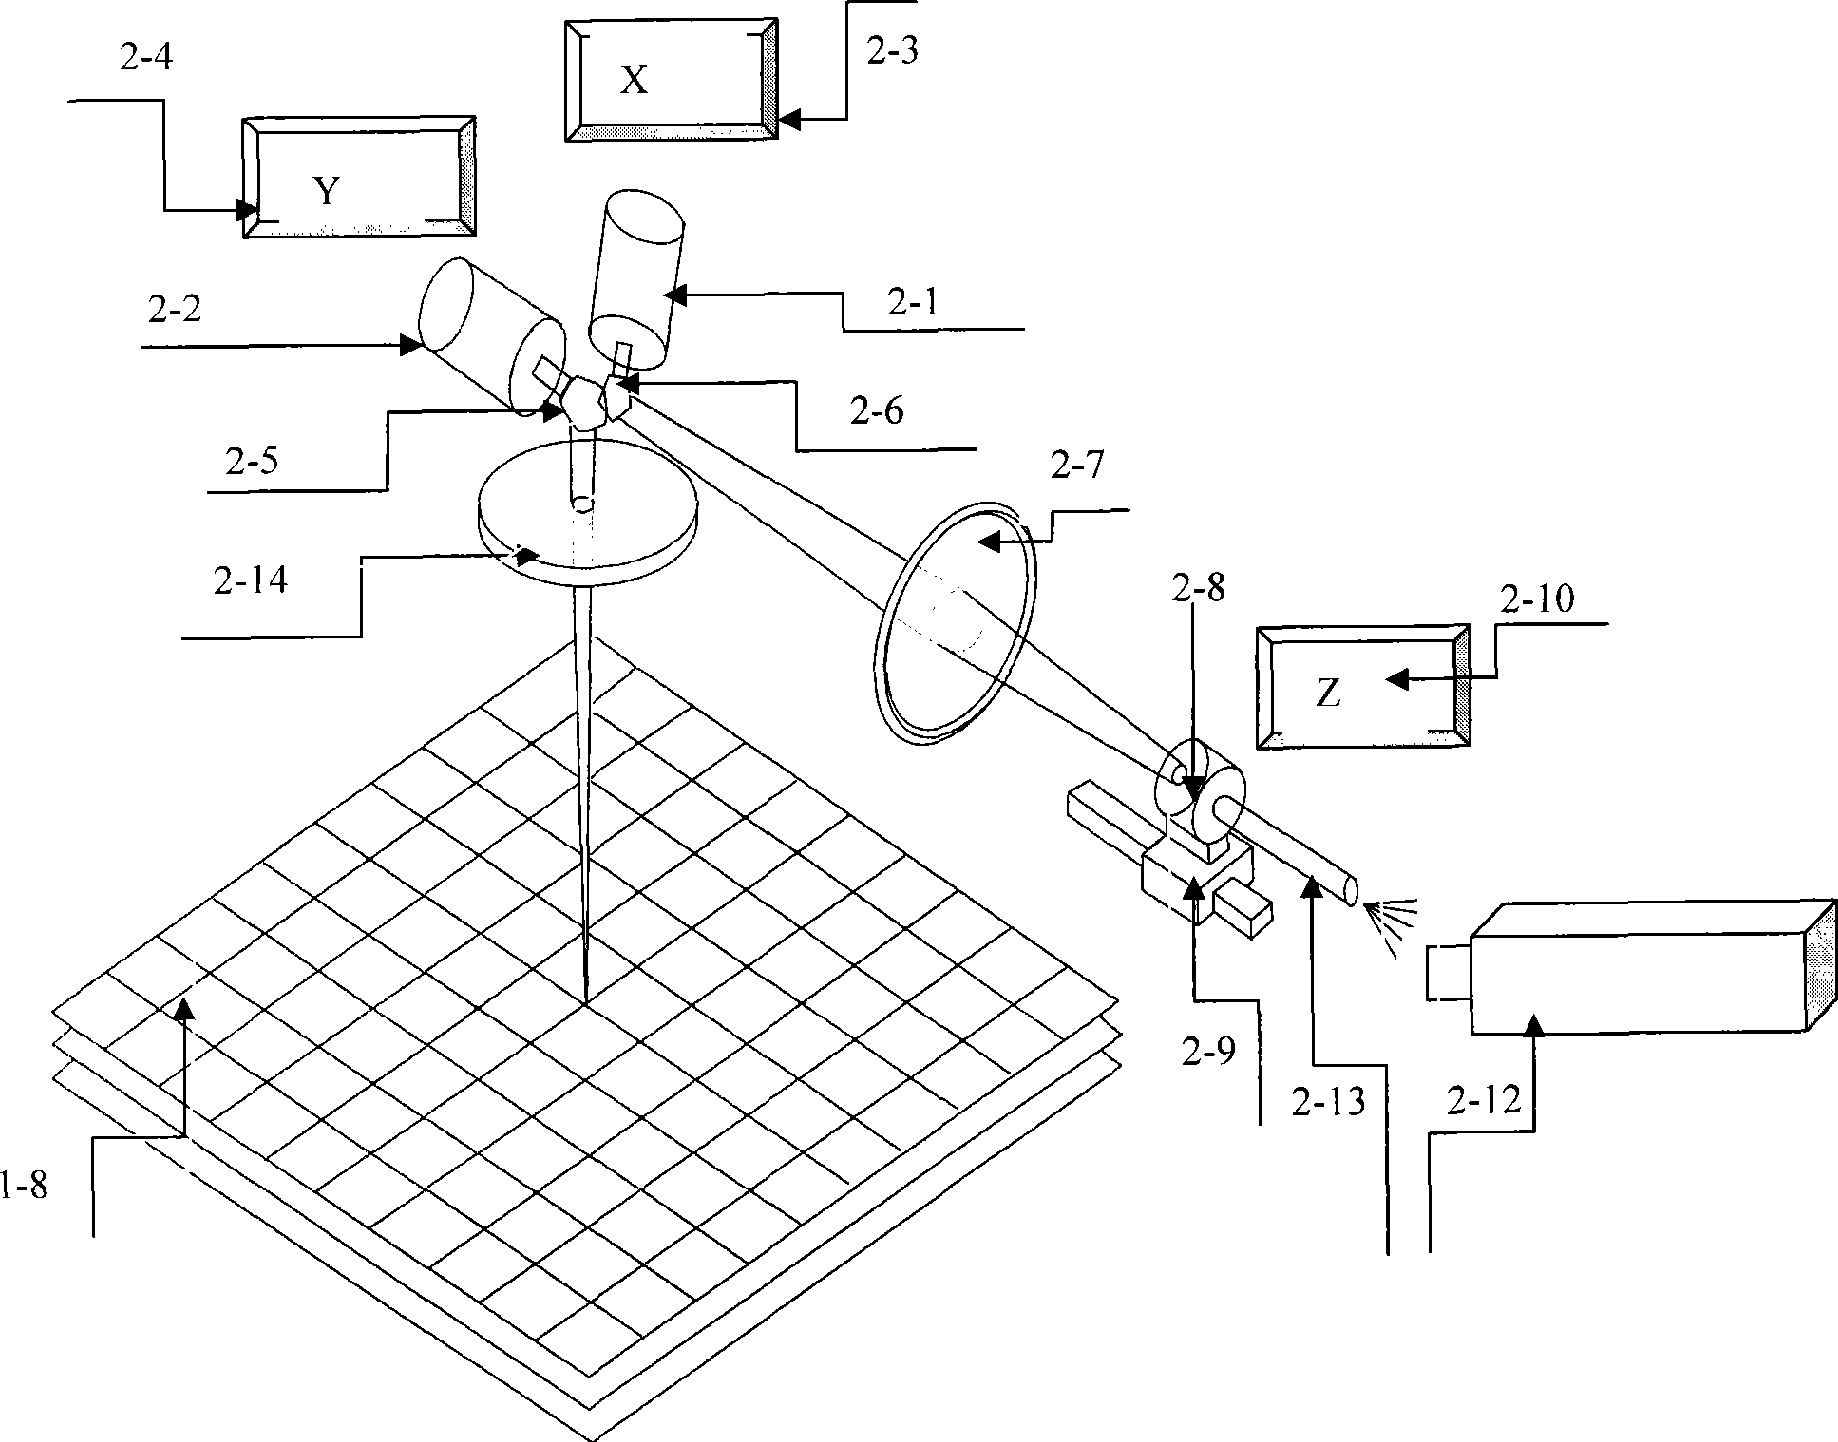 Novel apparatus used for film engraving and dotting of thin-film solar cell